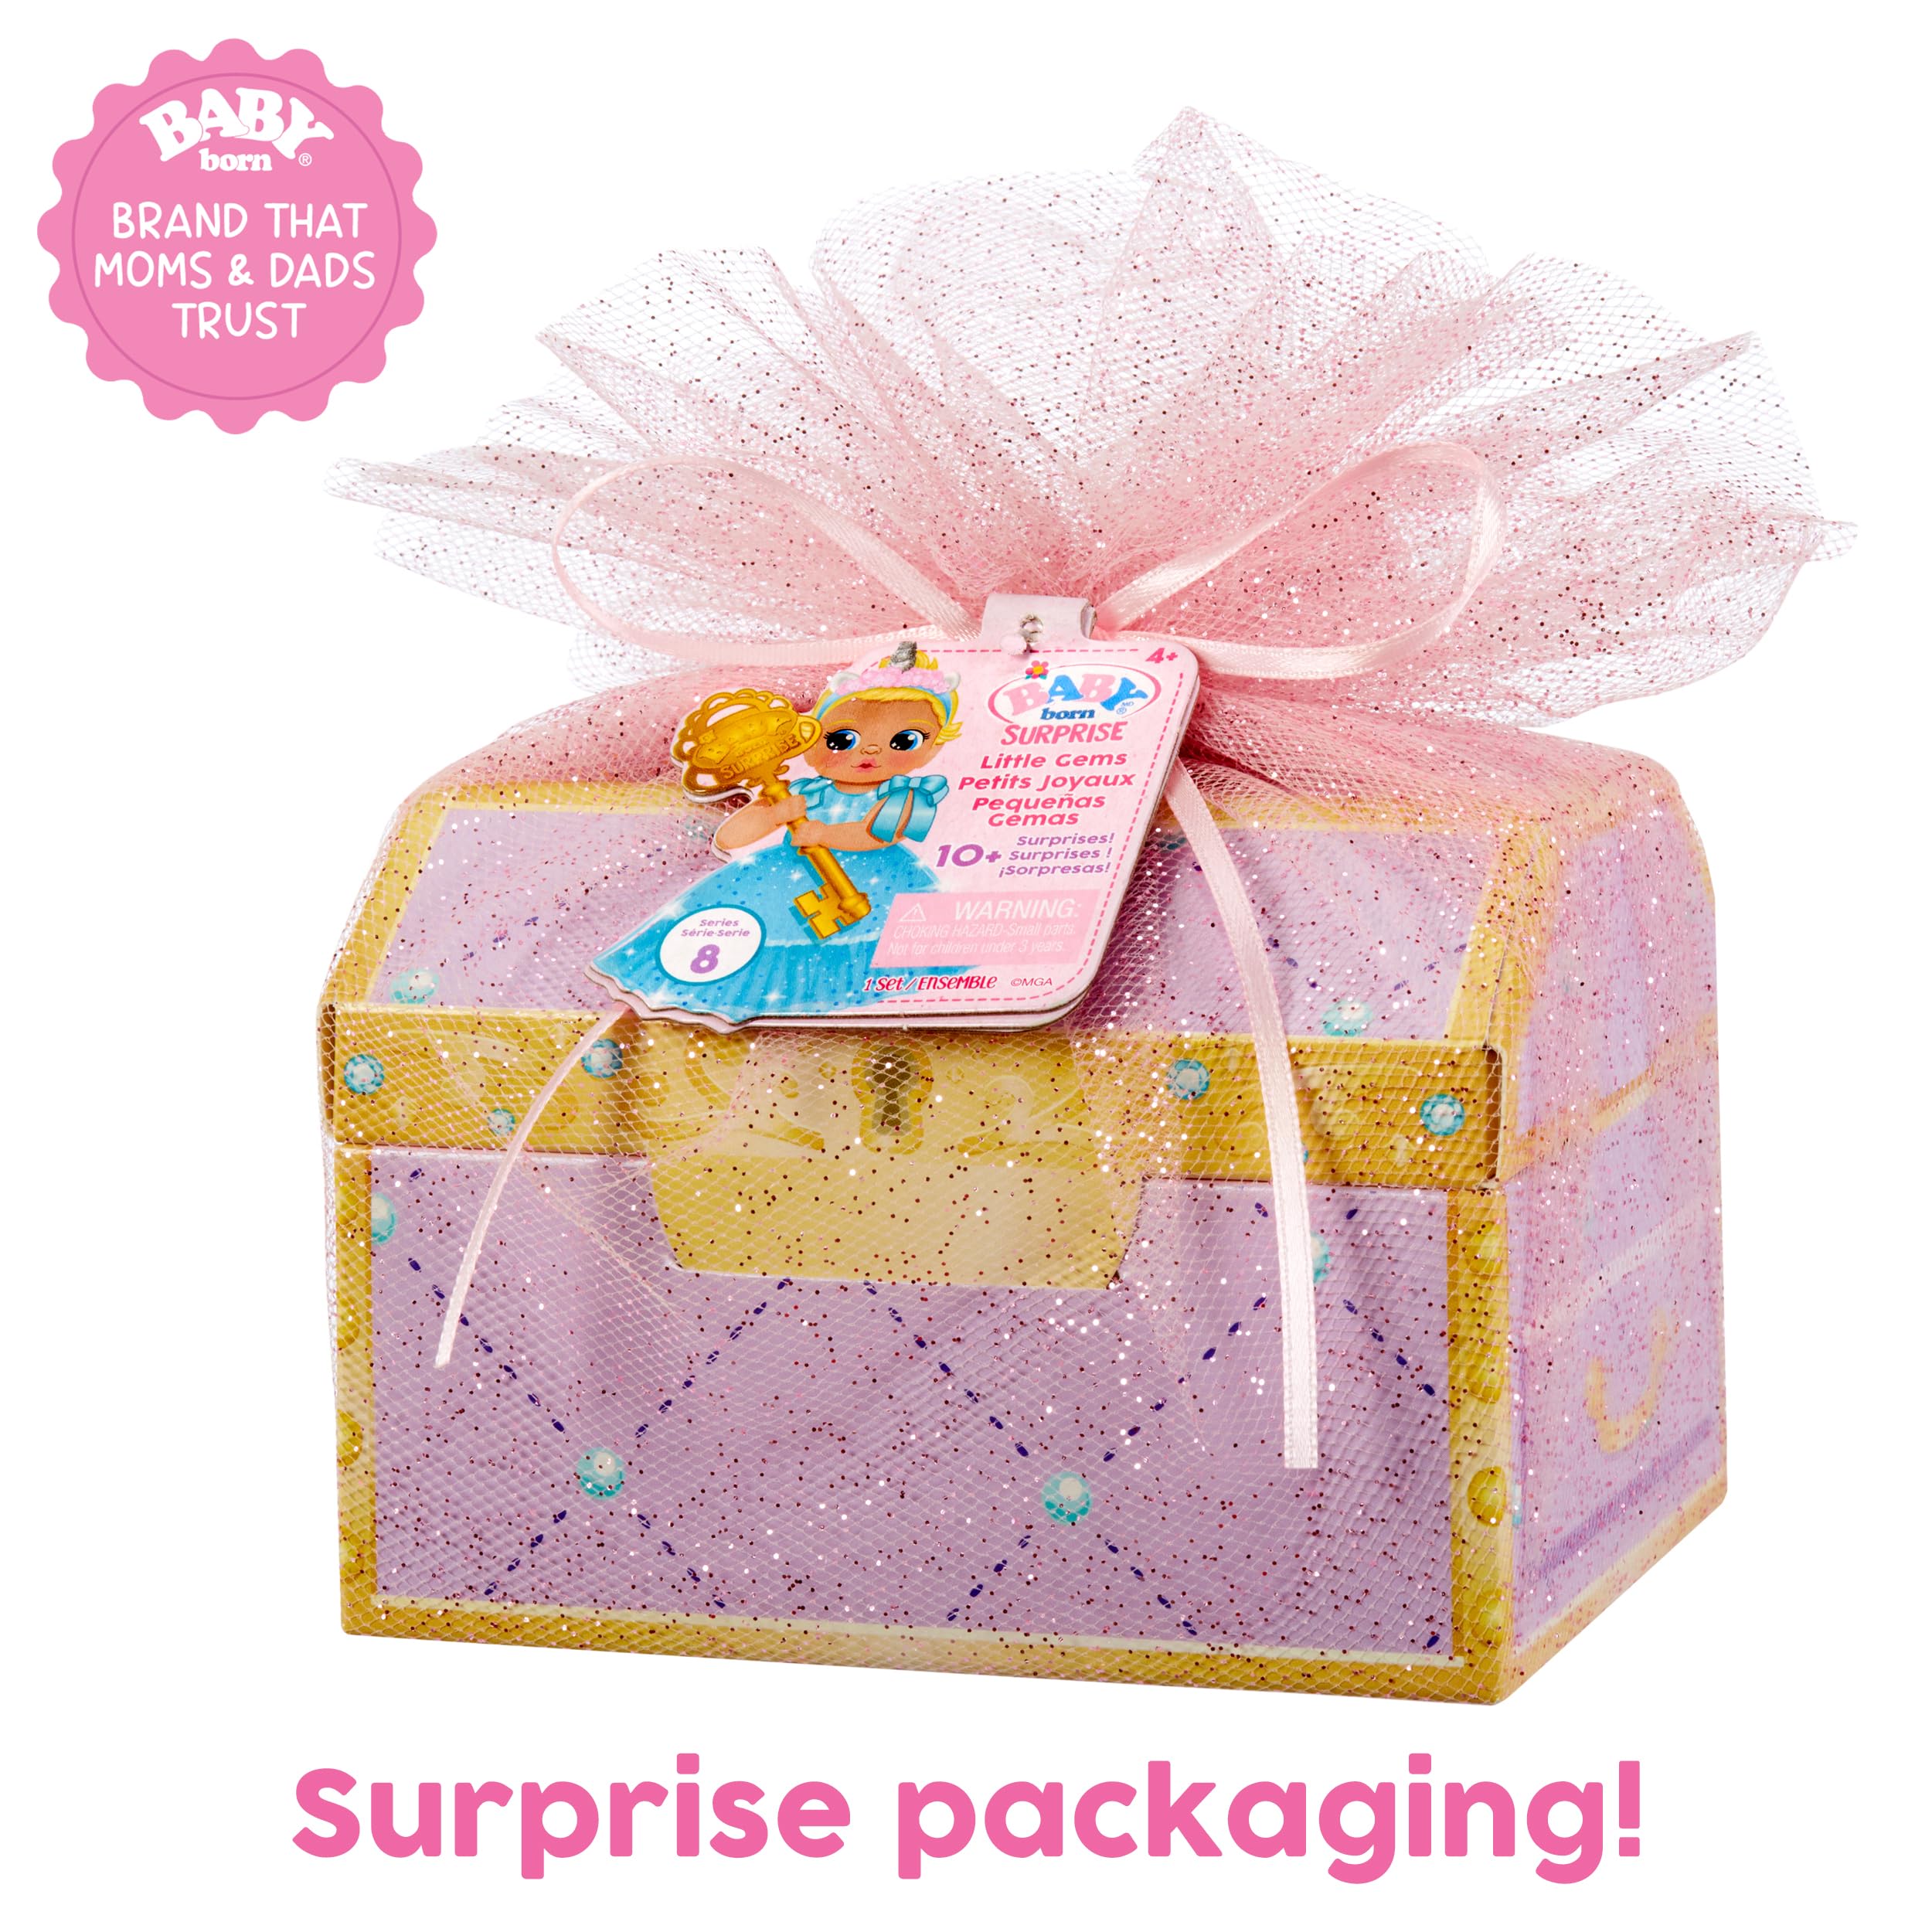 Baby Born Surprise Small Dolls Series 8 - Unwrap Surprise Collectible Baby Doll with 3 Water Surprises, Gemstone-Themed Dress, Color Change Diaper, Treasure Chest Packaging, for Kids Ages 4 & Up